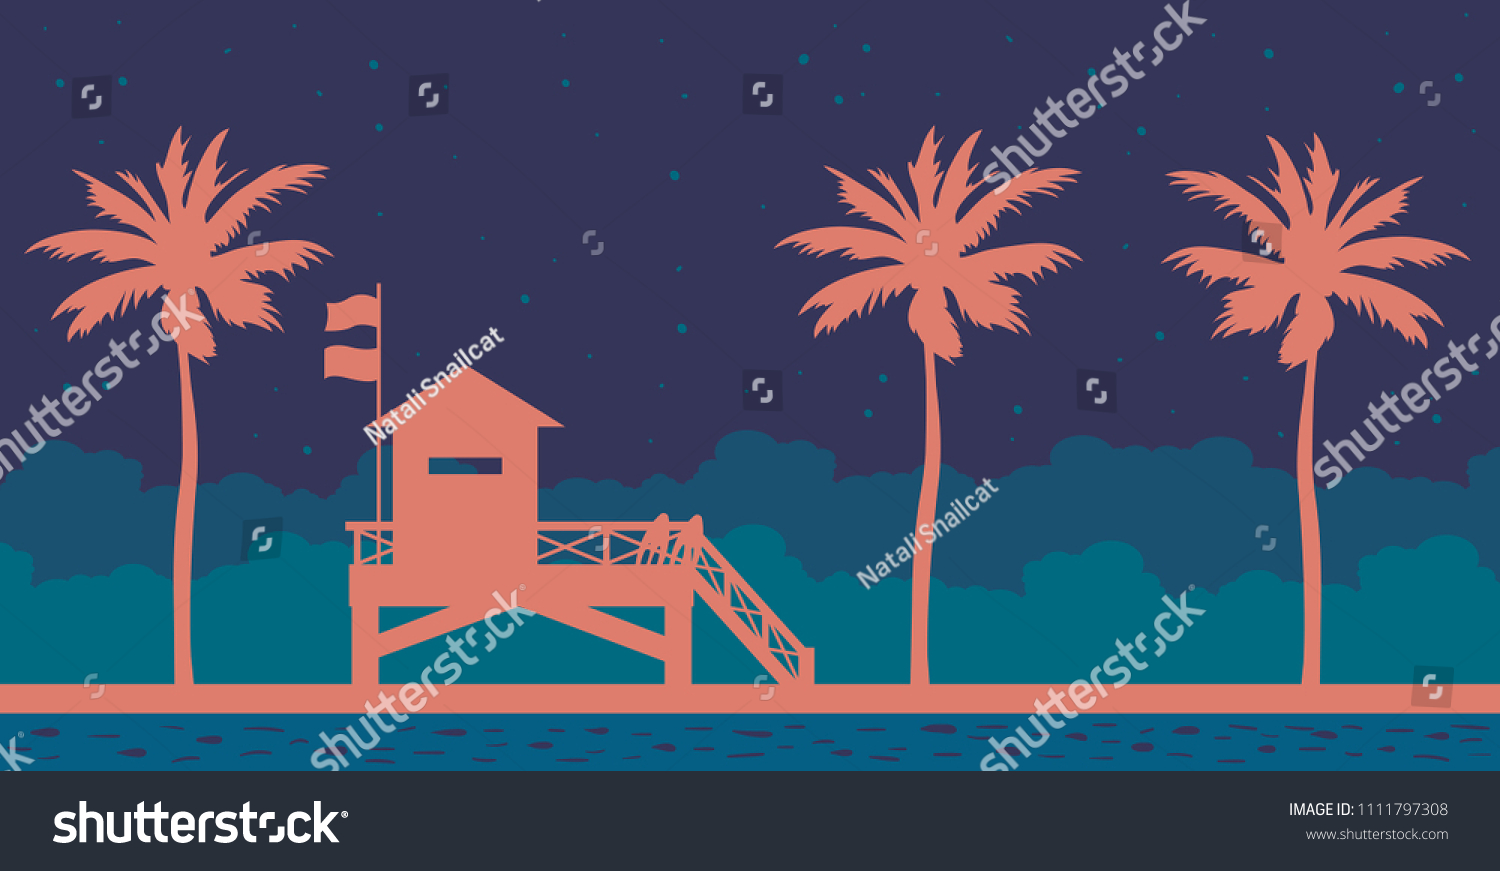 SVG of Silhouette of lifeguard station on a beach and blue sea on a night starry sky. Vector illustration with summer landscape. svg